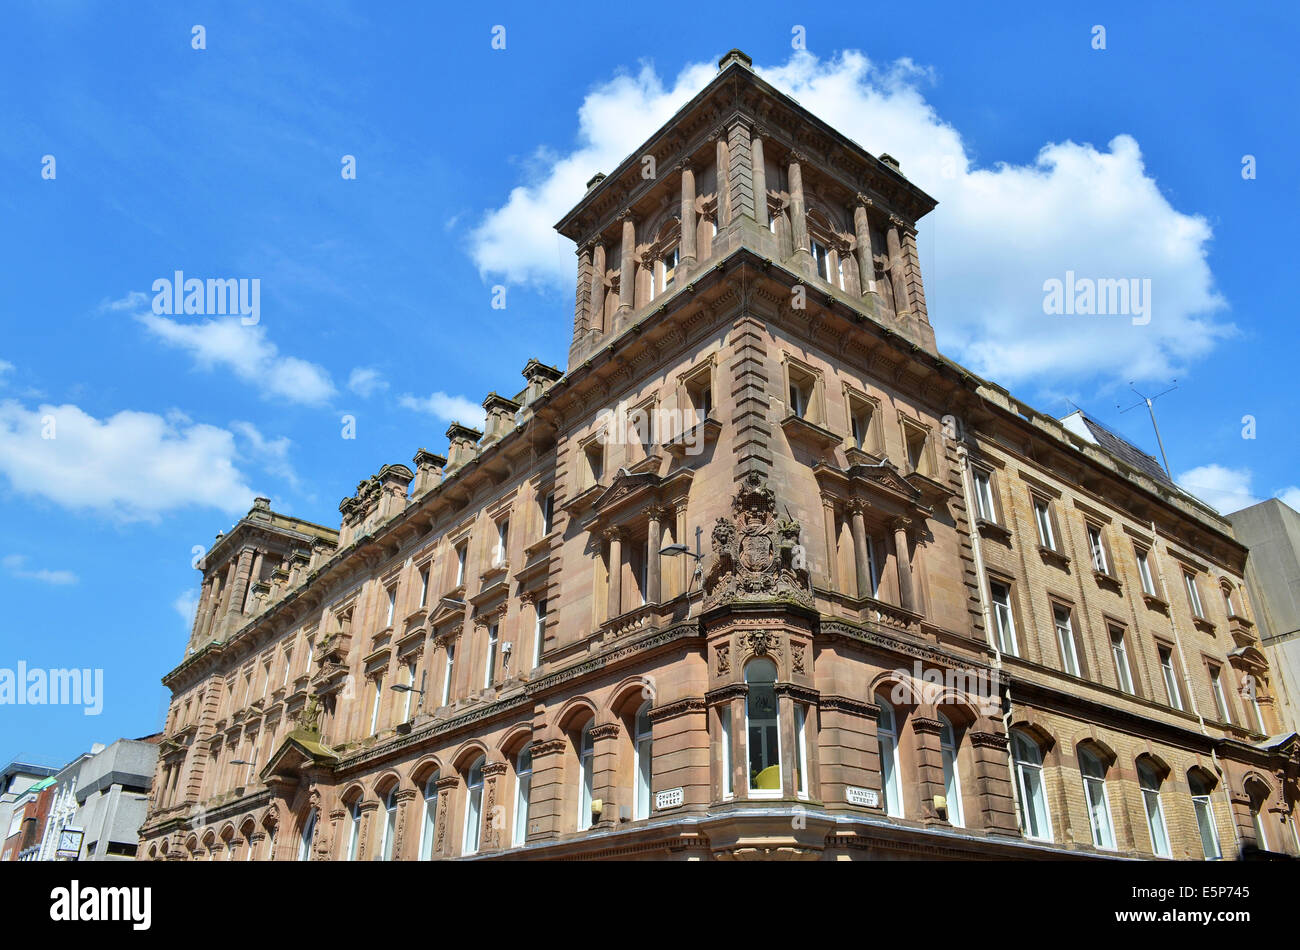 The Marks & Spencer building in Liverpool, England, UK Stock Photo